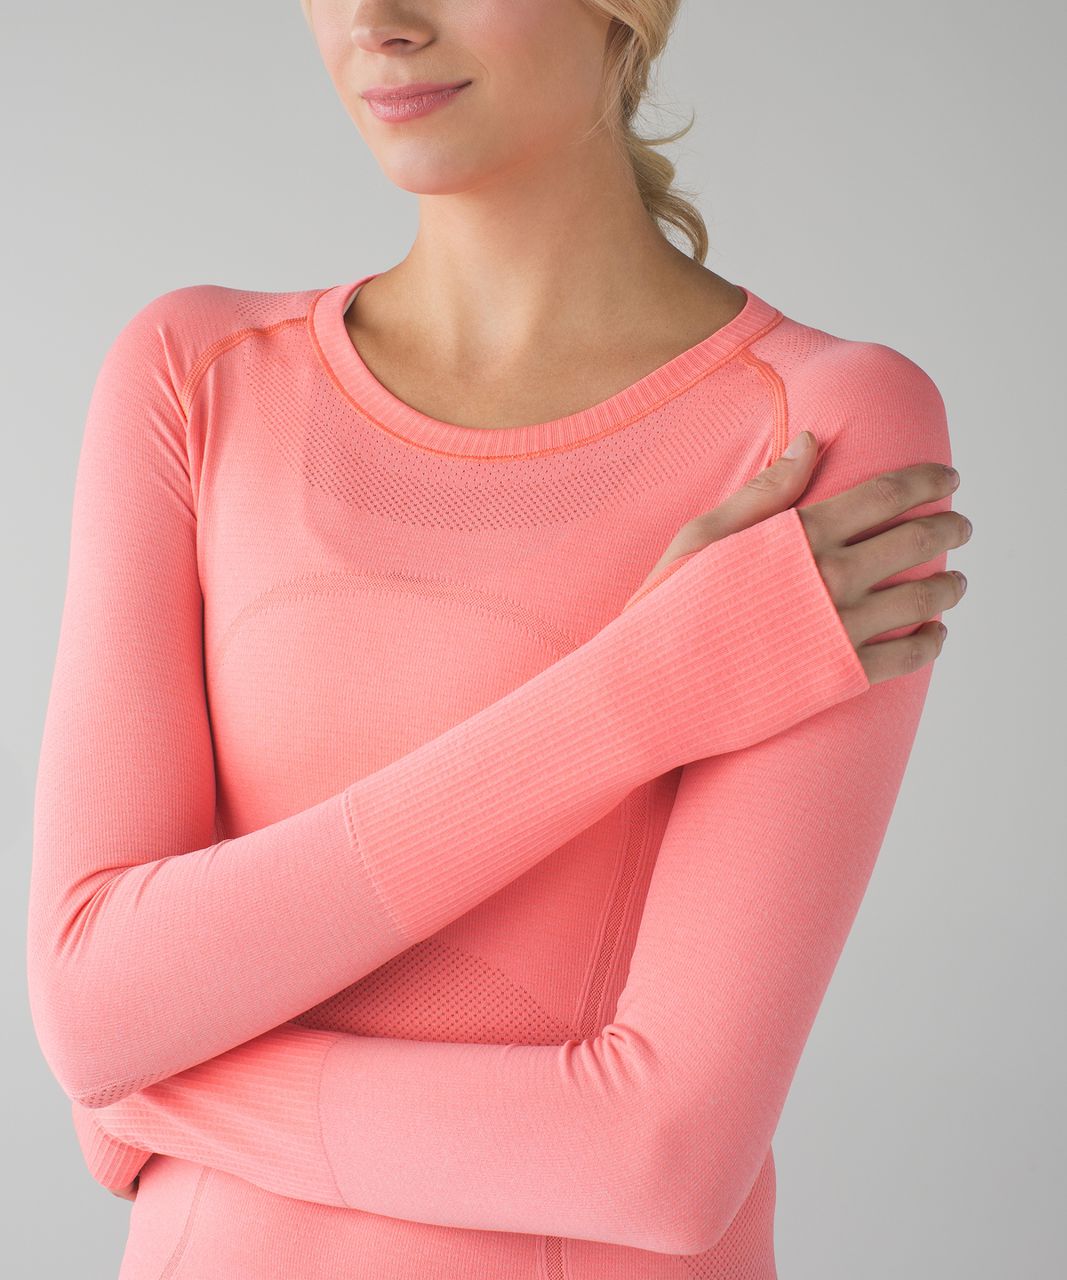 Lululemon Swiftly Tech Long Sleeve Crew - Heathered Very Light Flare (First Release)